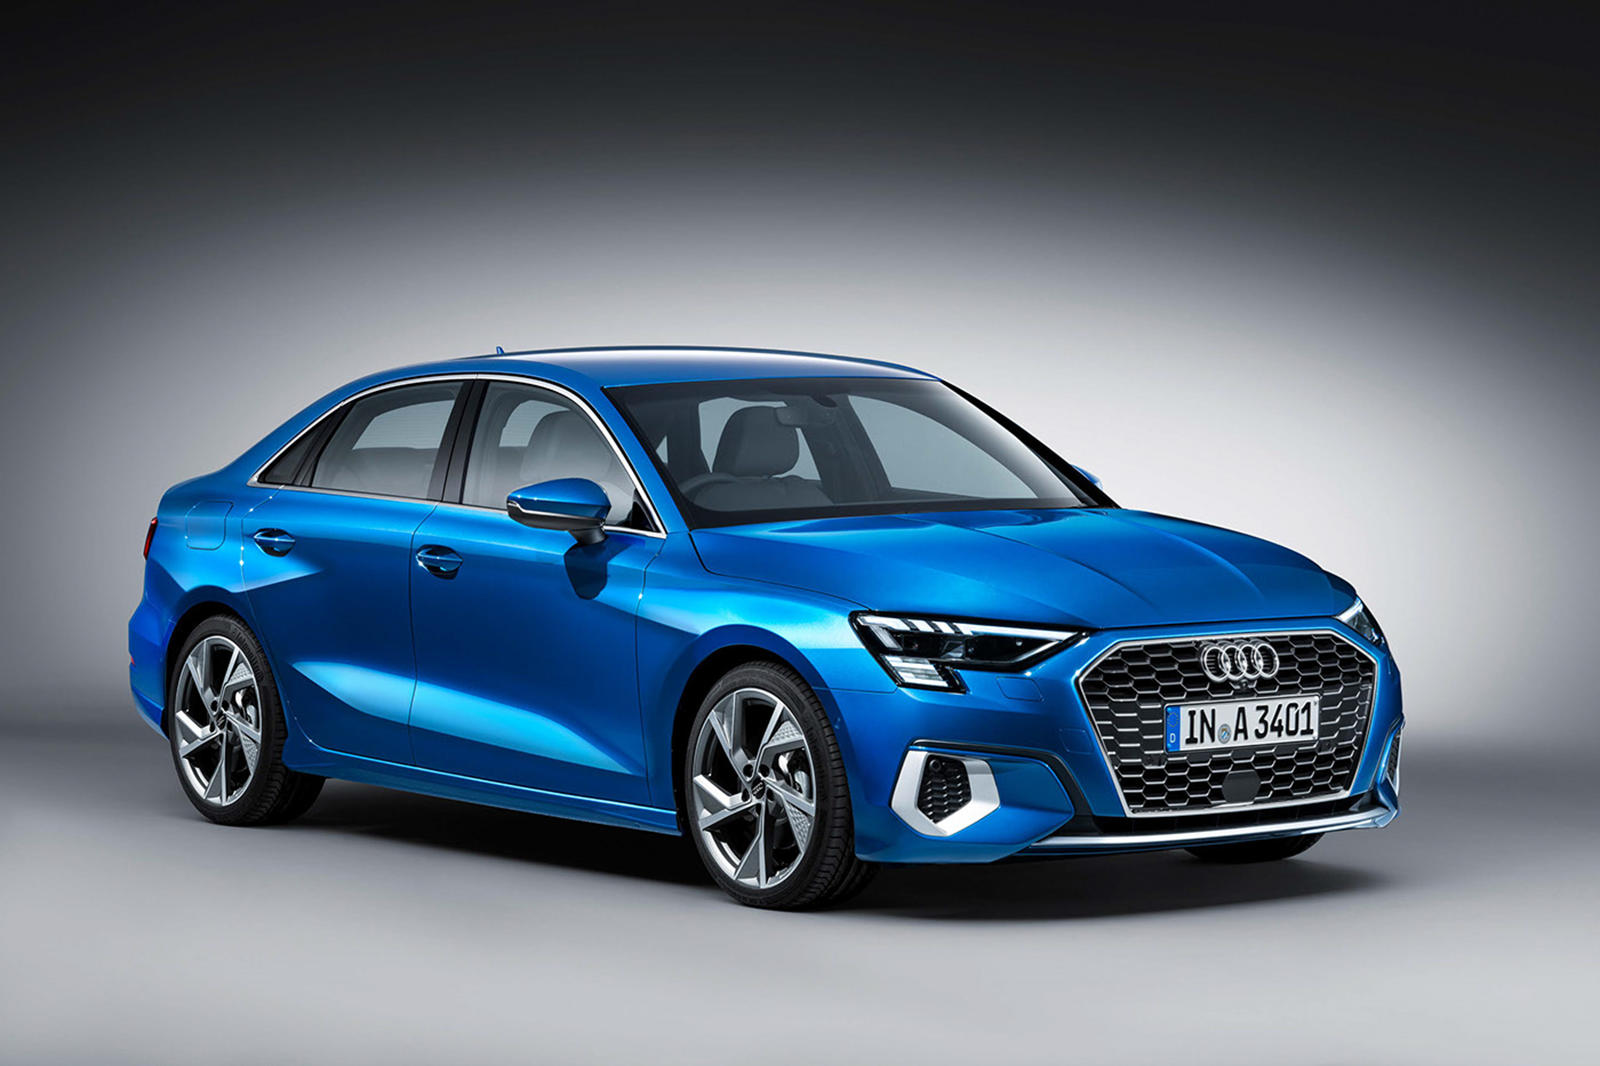 NYIAS Preview - all new Audi A3 and S3 Sedan! - AudiWorld